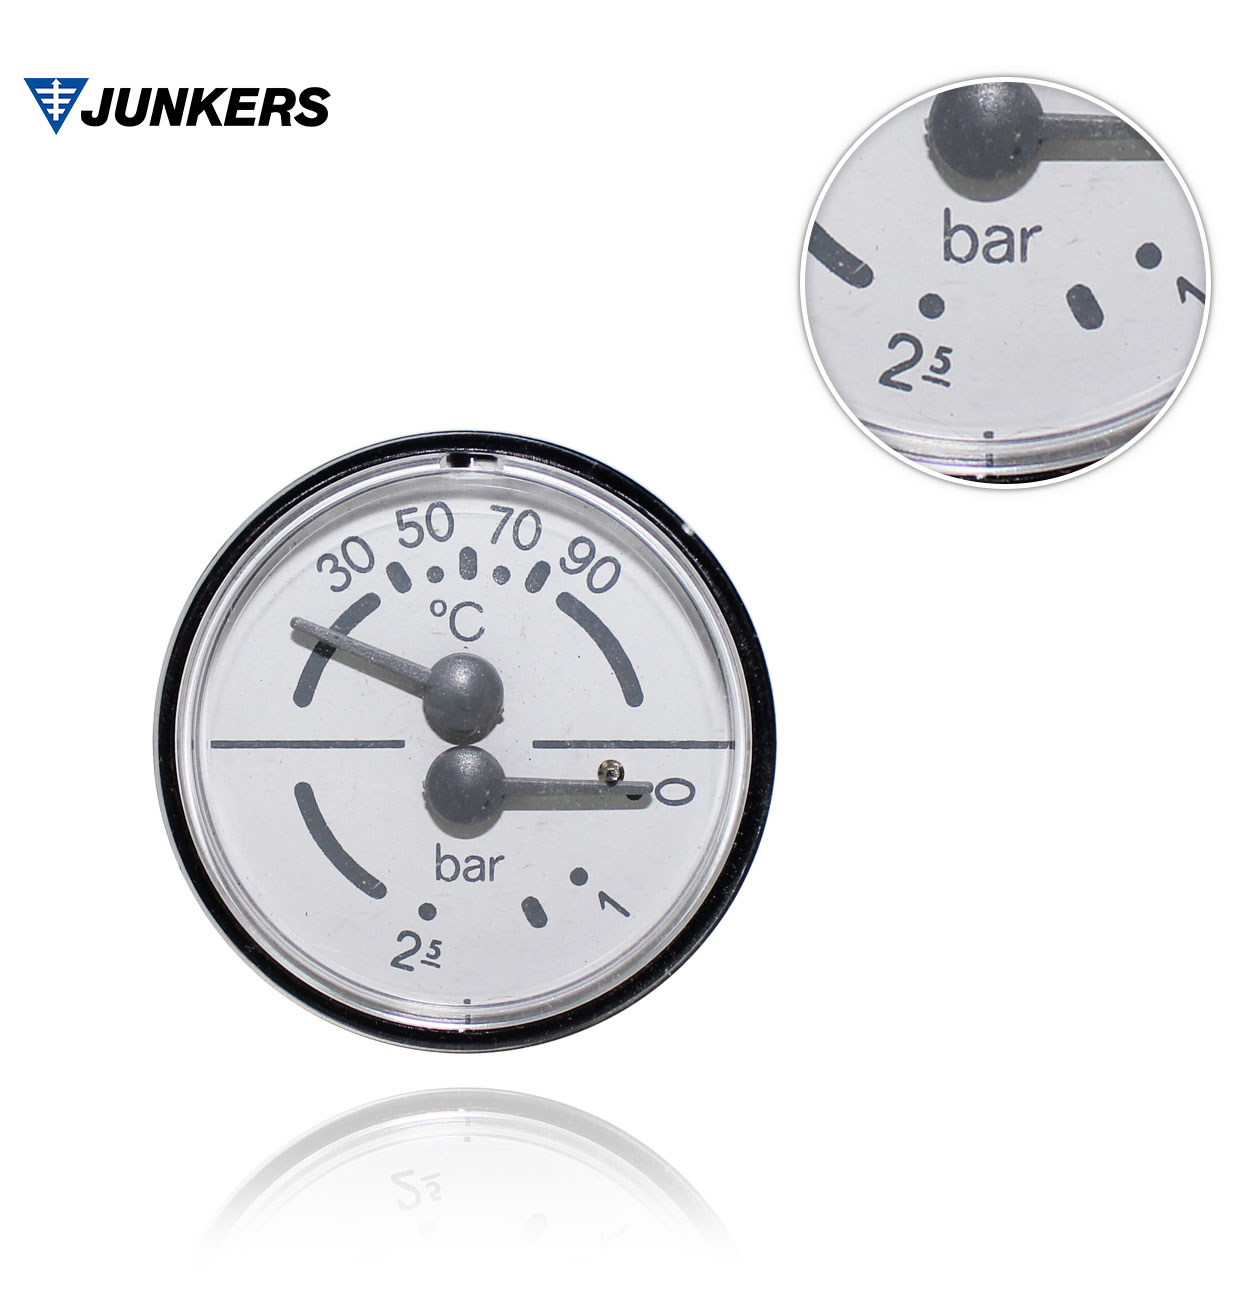 JUNKERS 8716743056 GLM 5 THERMOMANOMETER